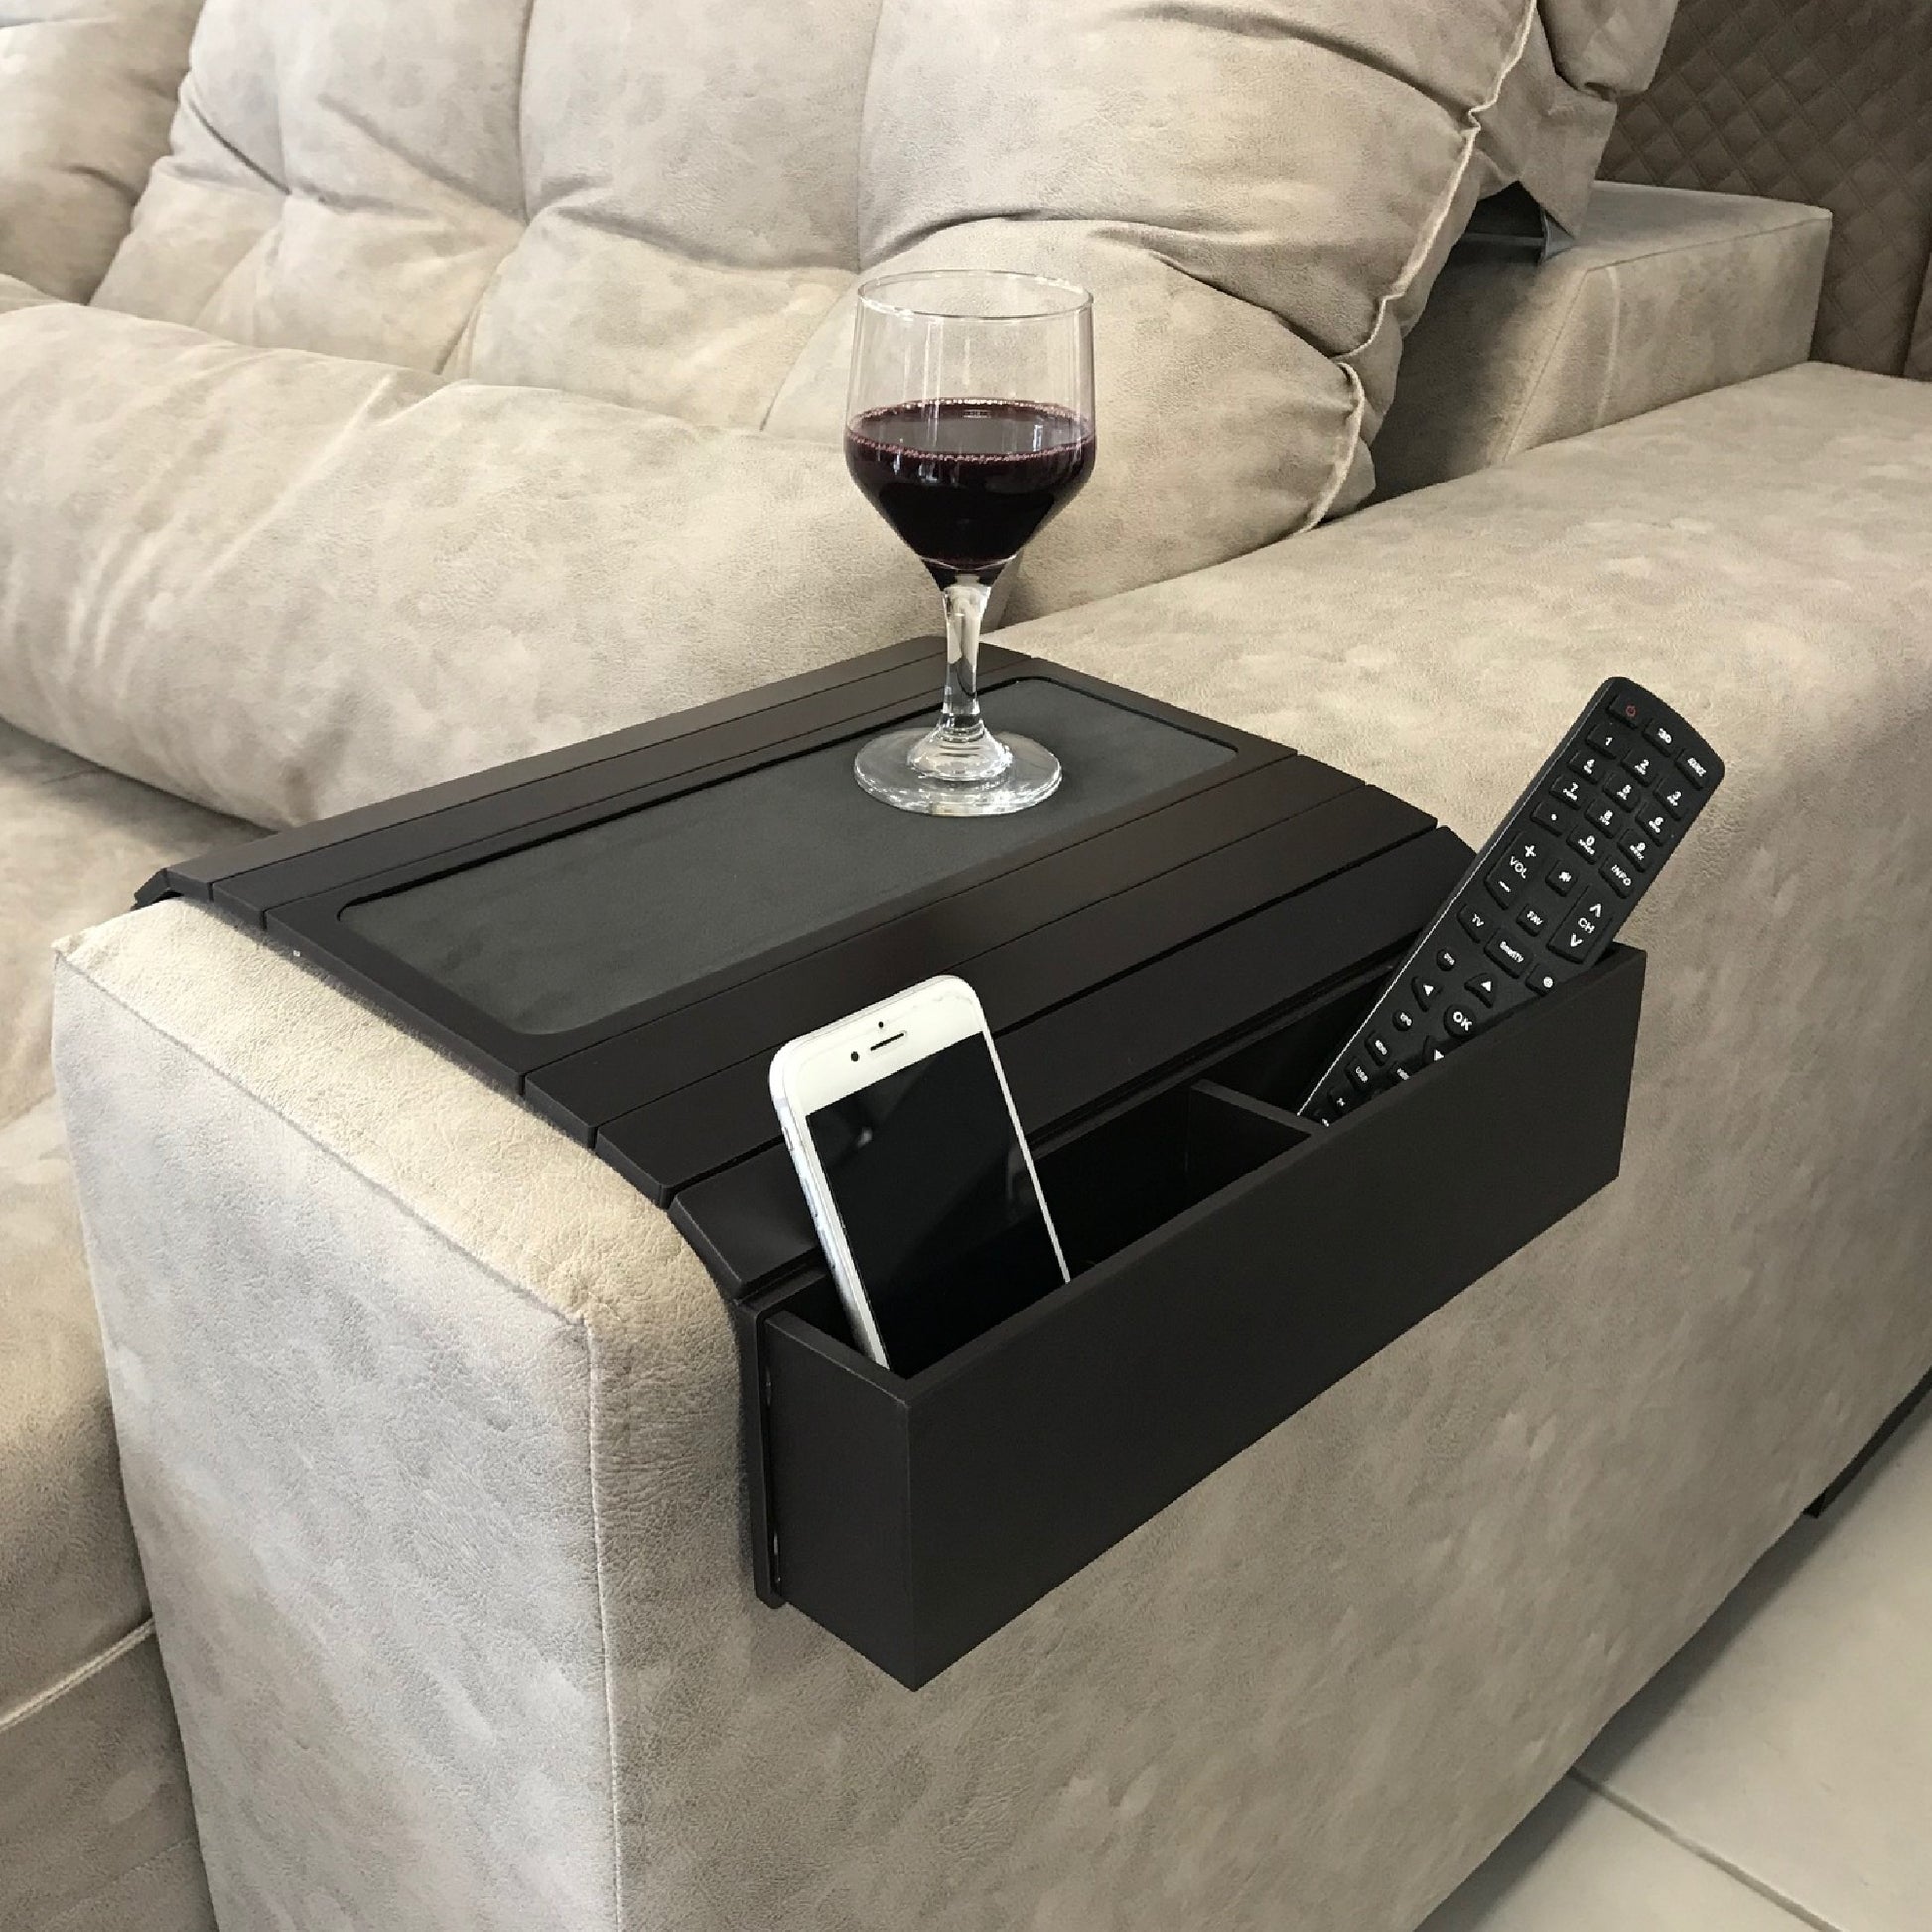 Sofa, Couch, Bed, TV and Lap Serving Tray Table for Eating with EVA Base, 2  Stainless Steel Bowls and 2 Cup Holders. Remote Control Holder. Arm Rest